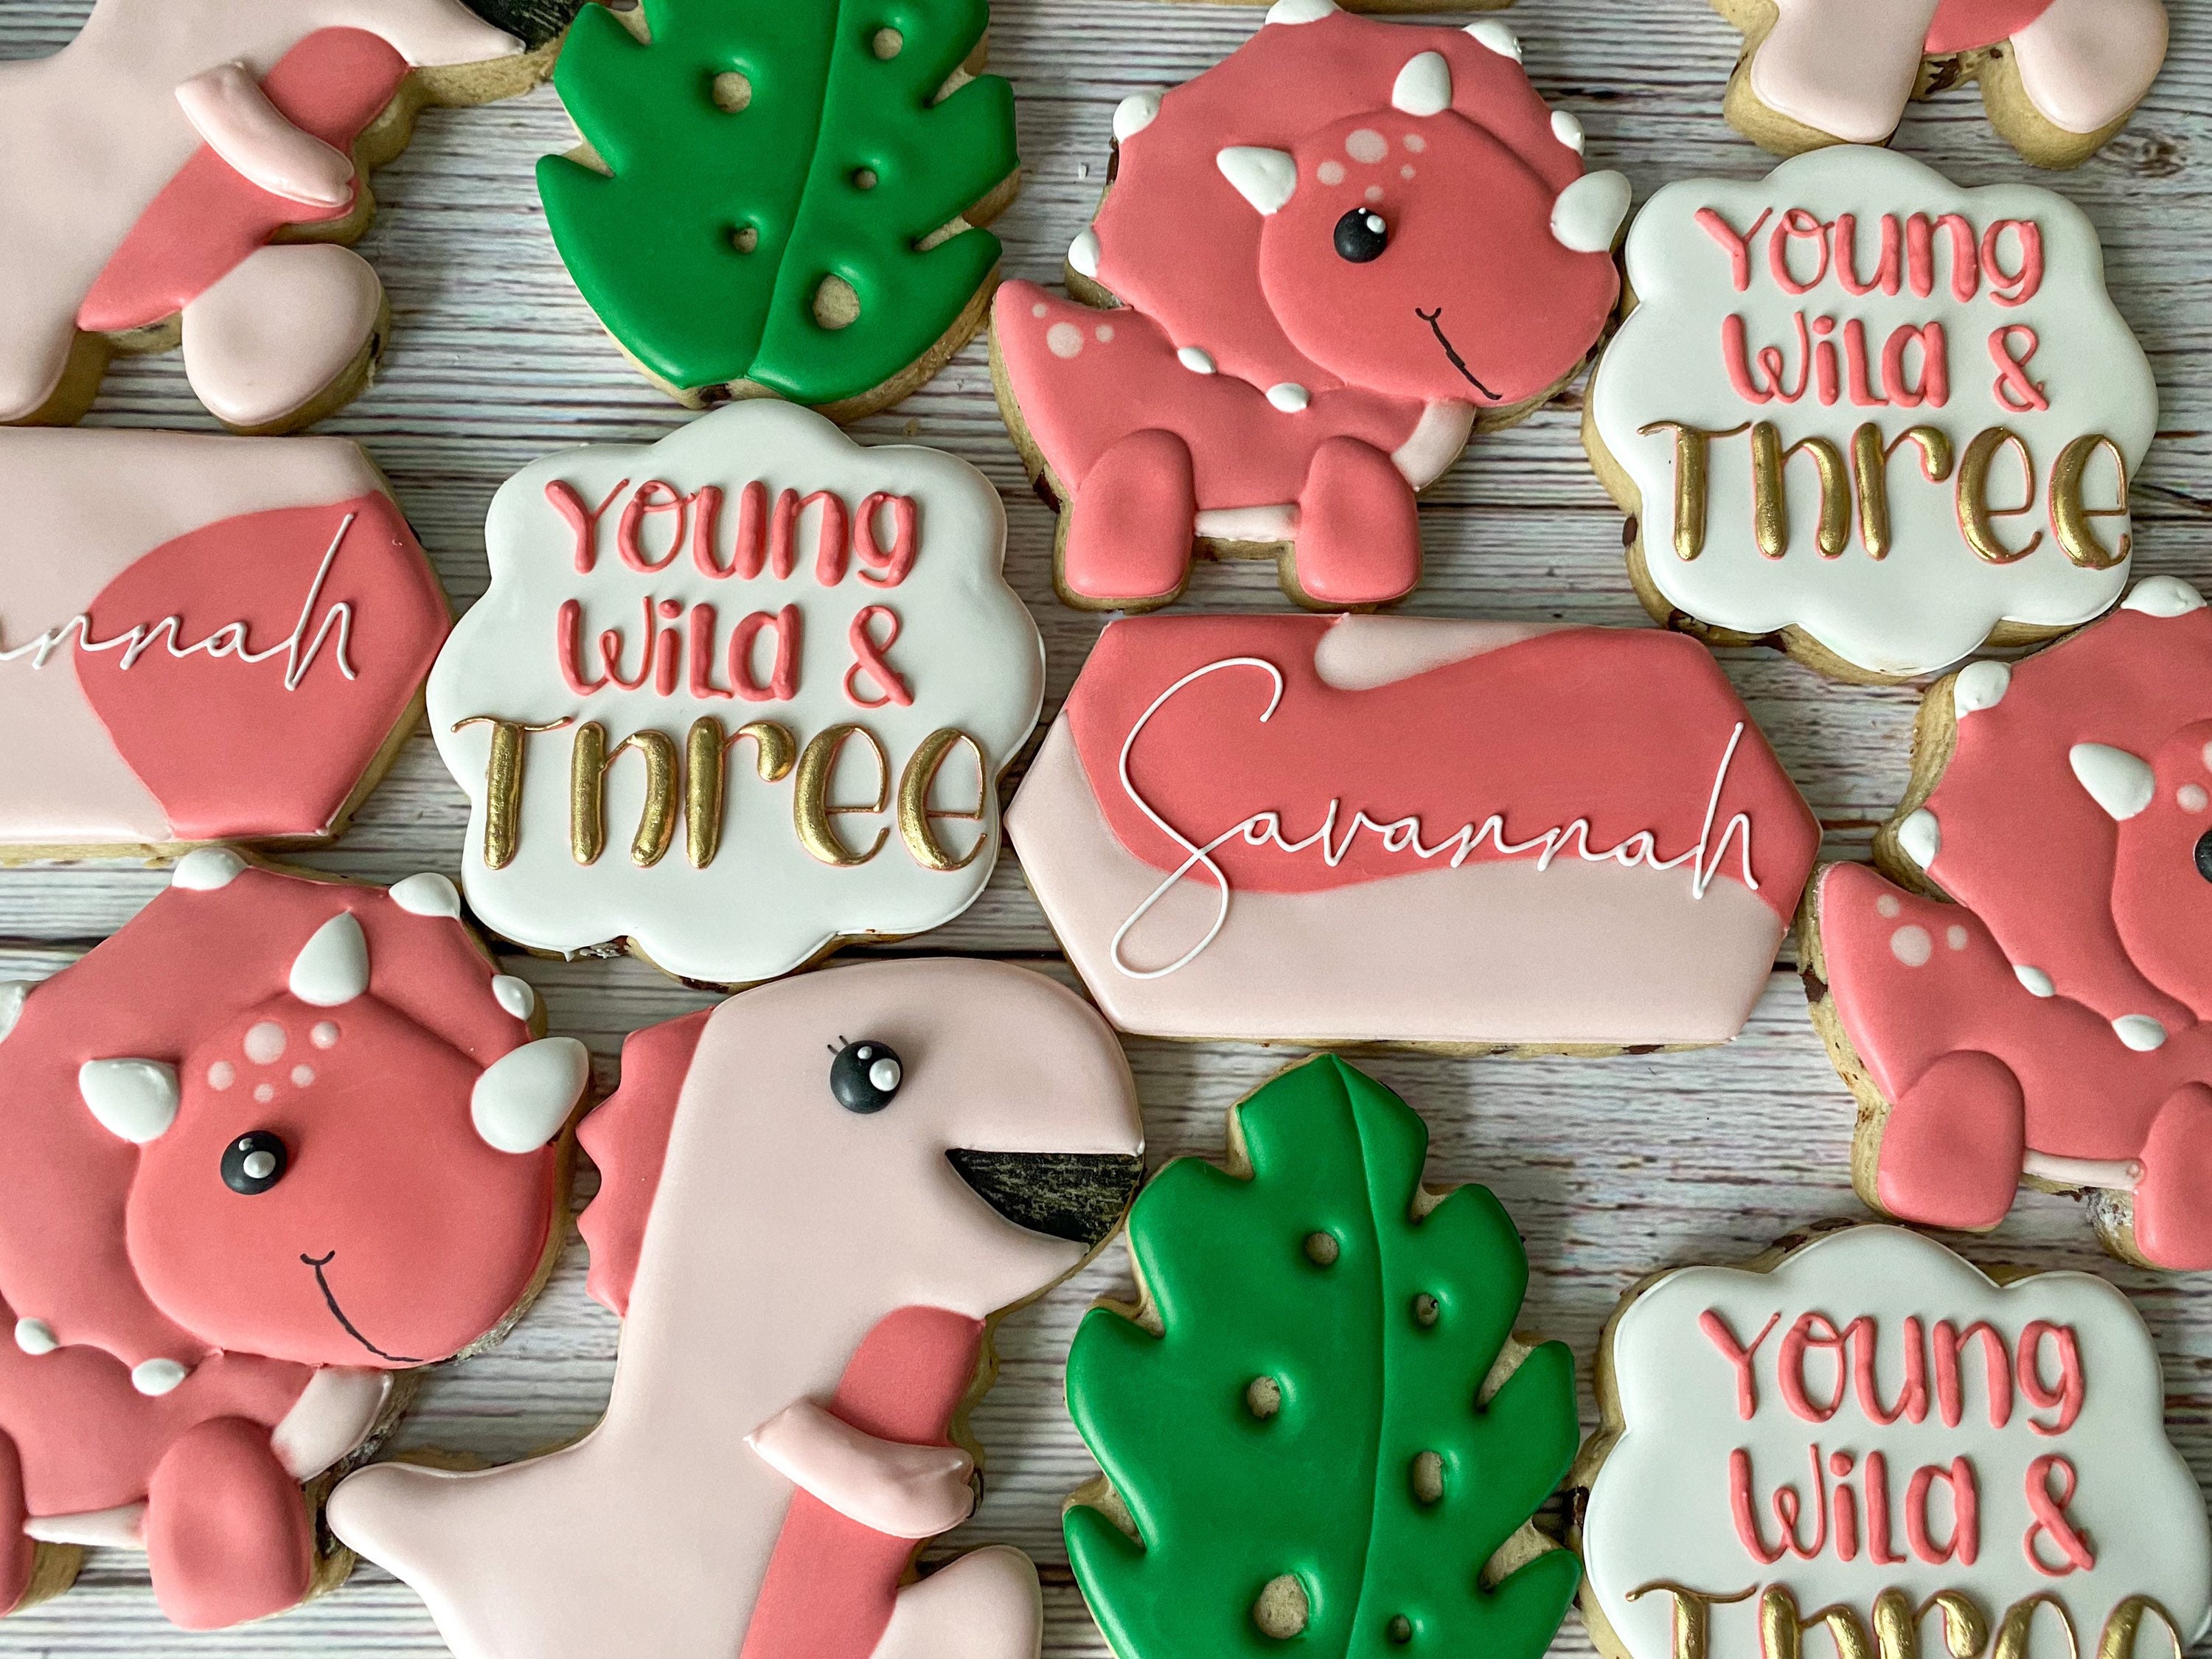 18 Young wild and three girl dino cookies -  Portugal